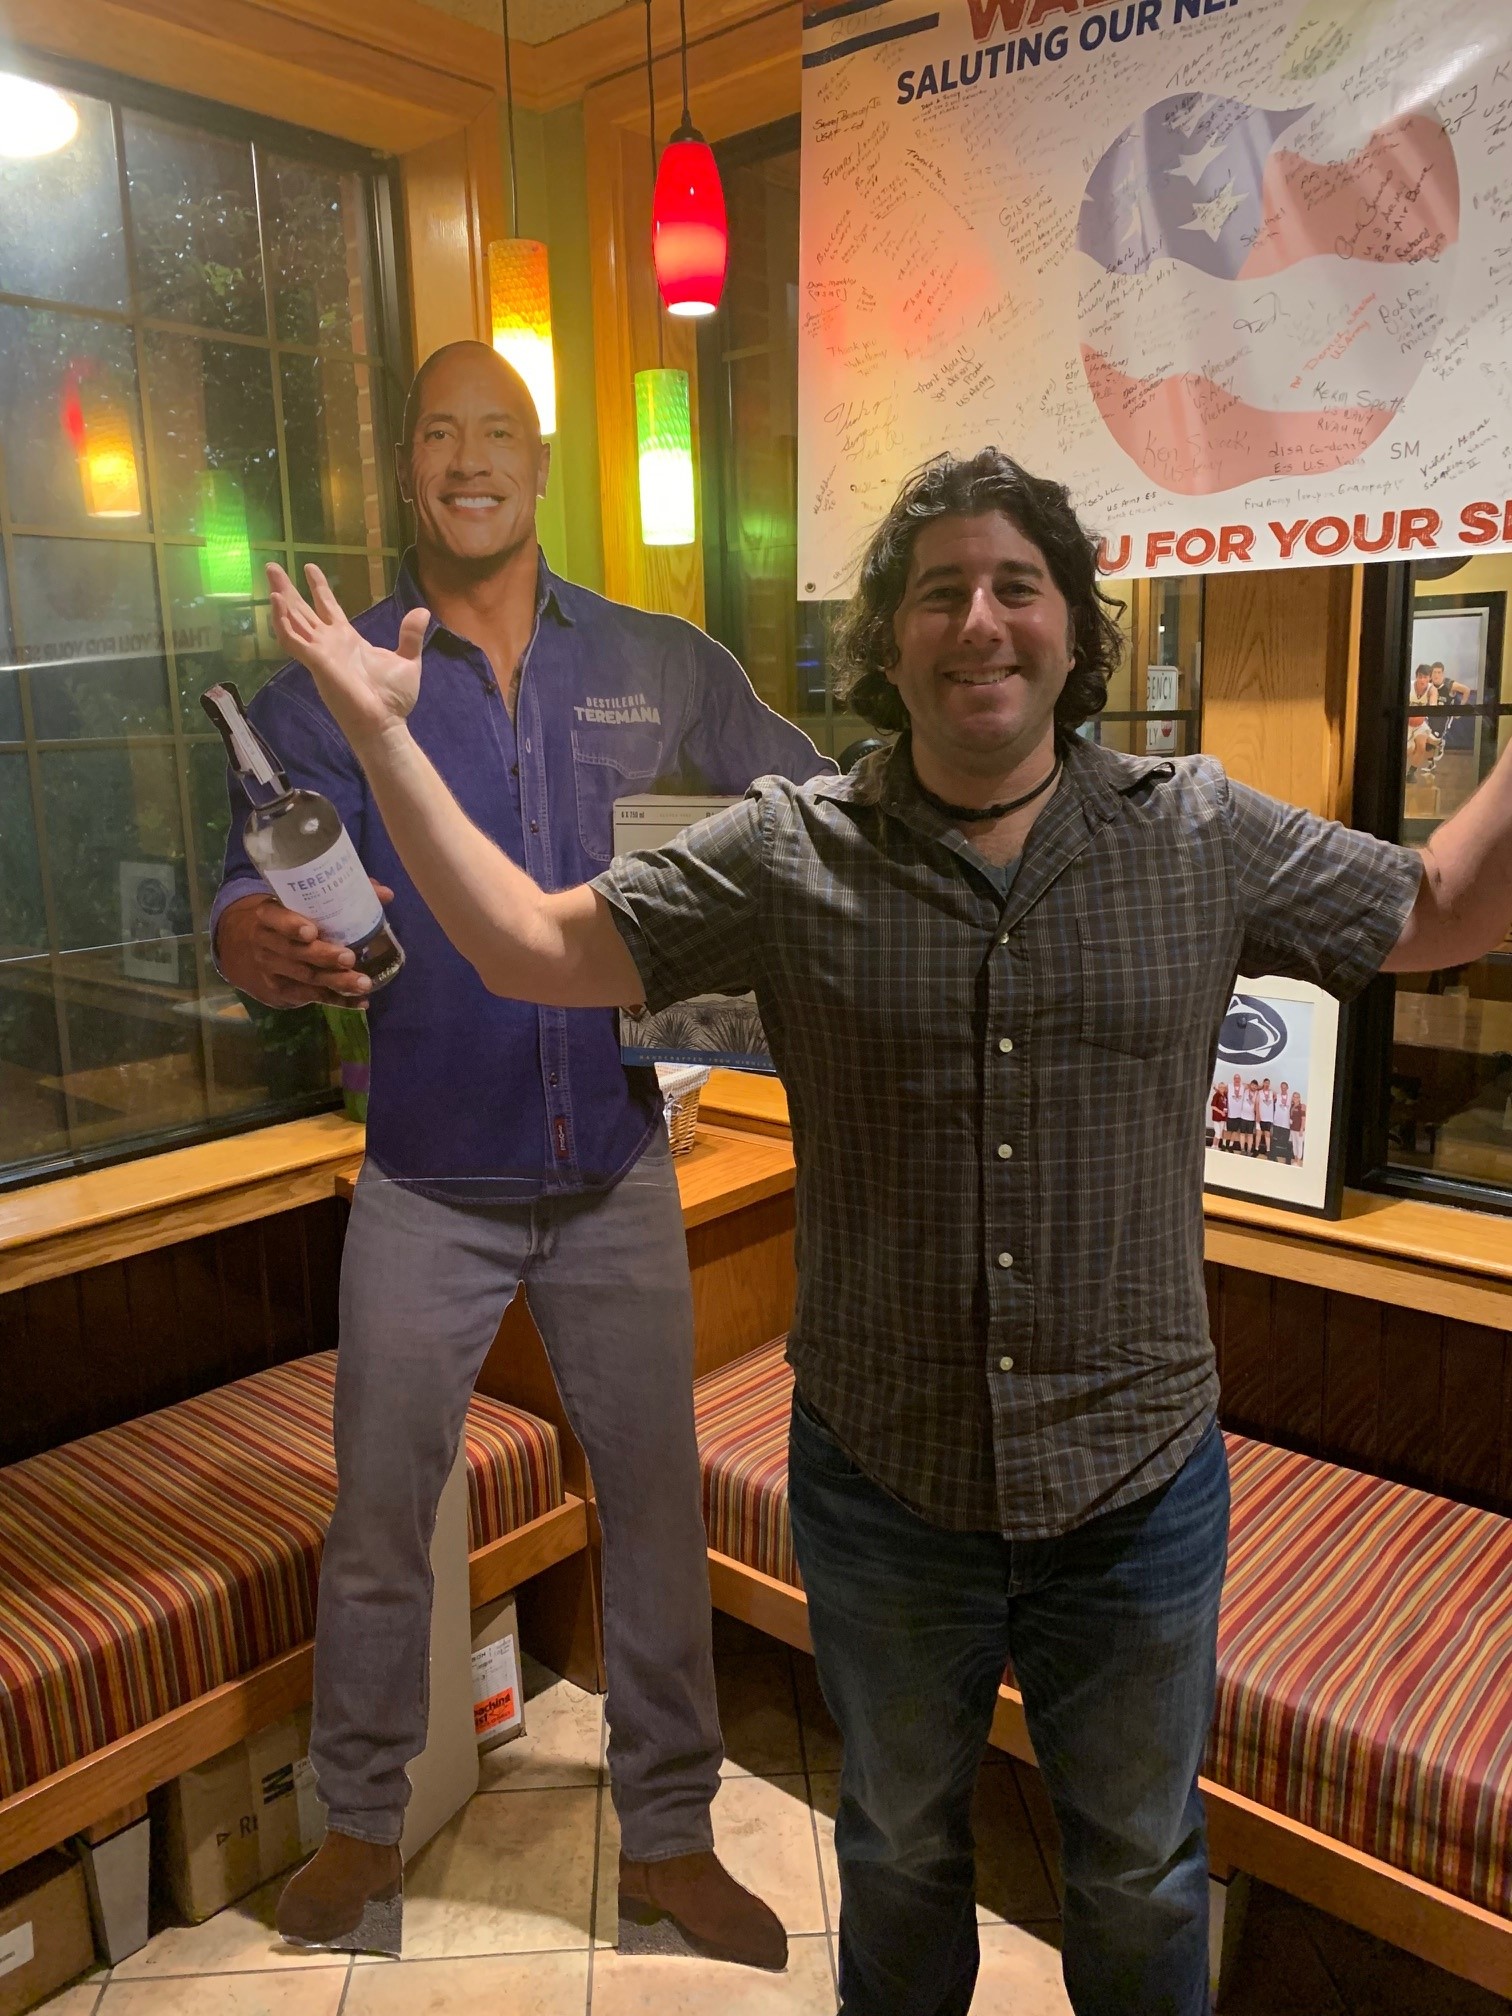 Lee shrugs w The Rock at Applebee's (Selinsgrove, PA).